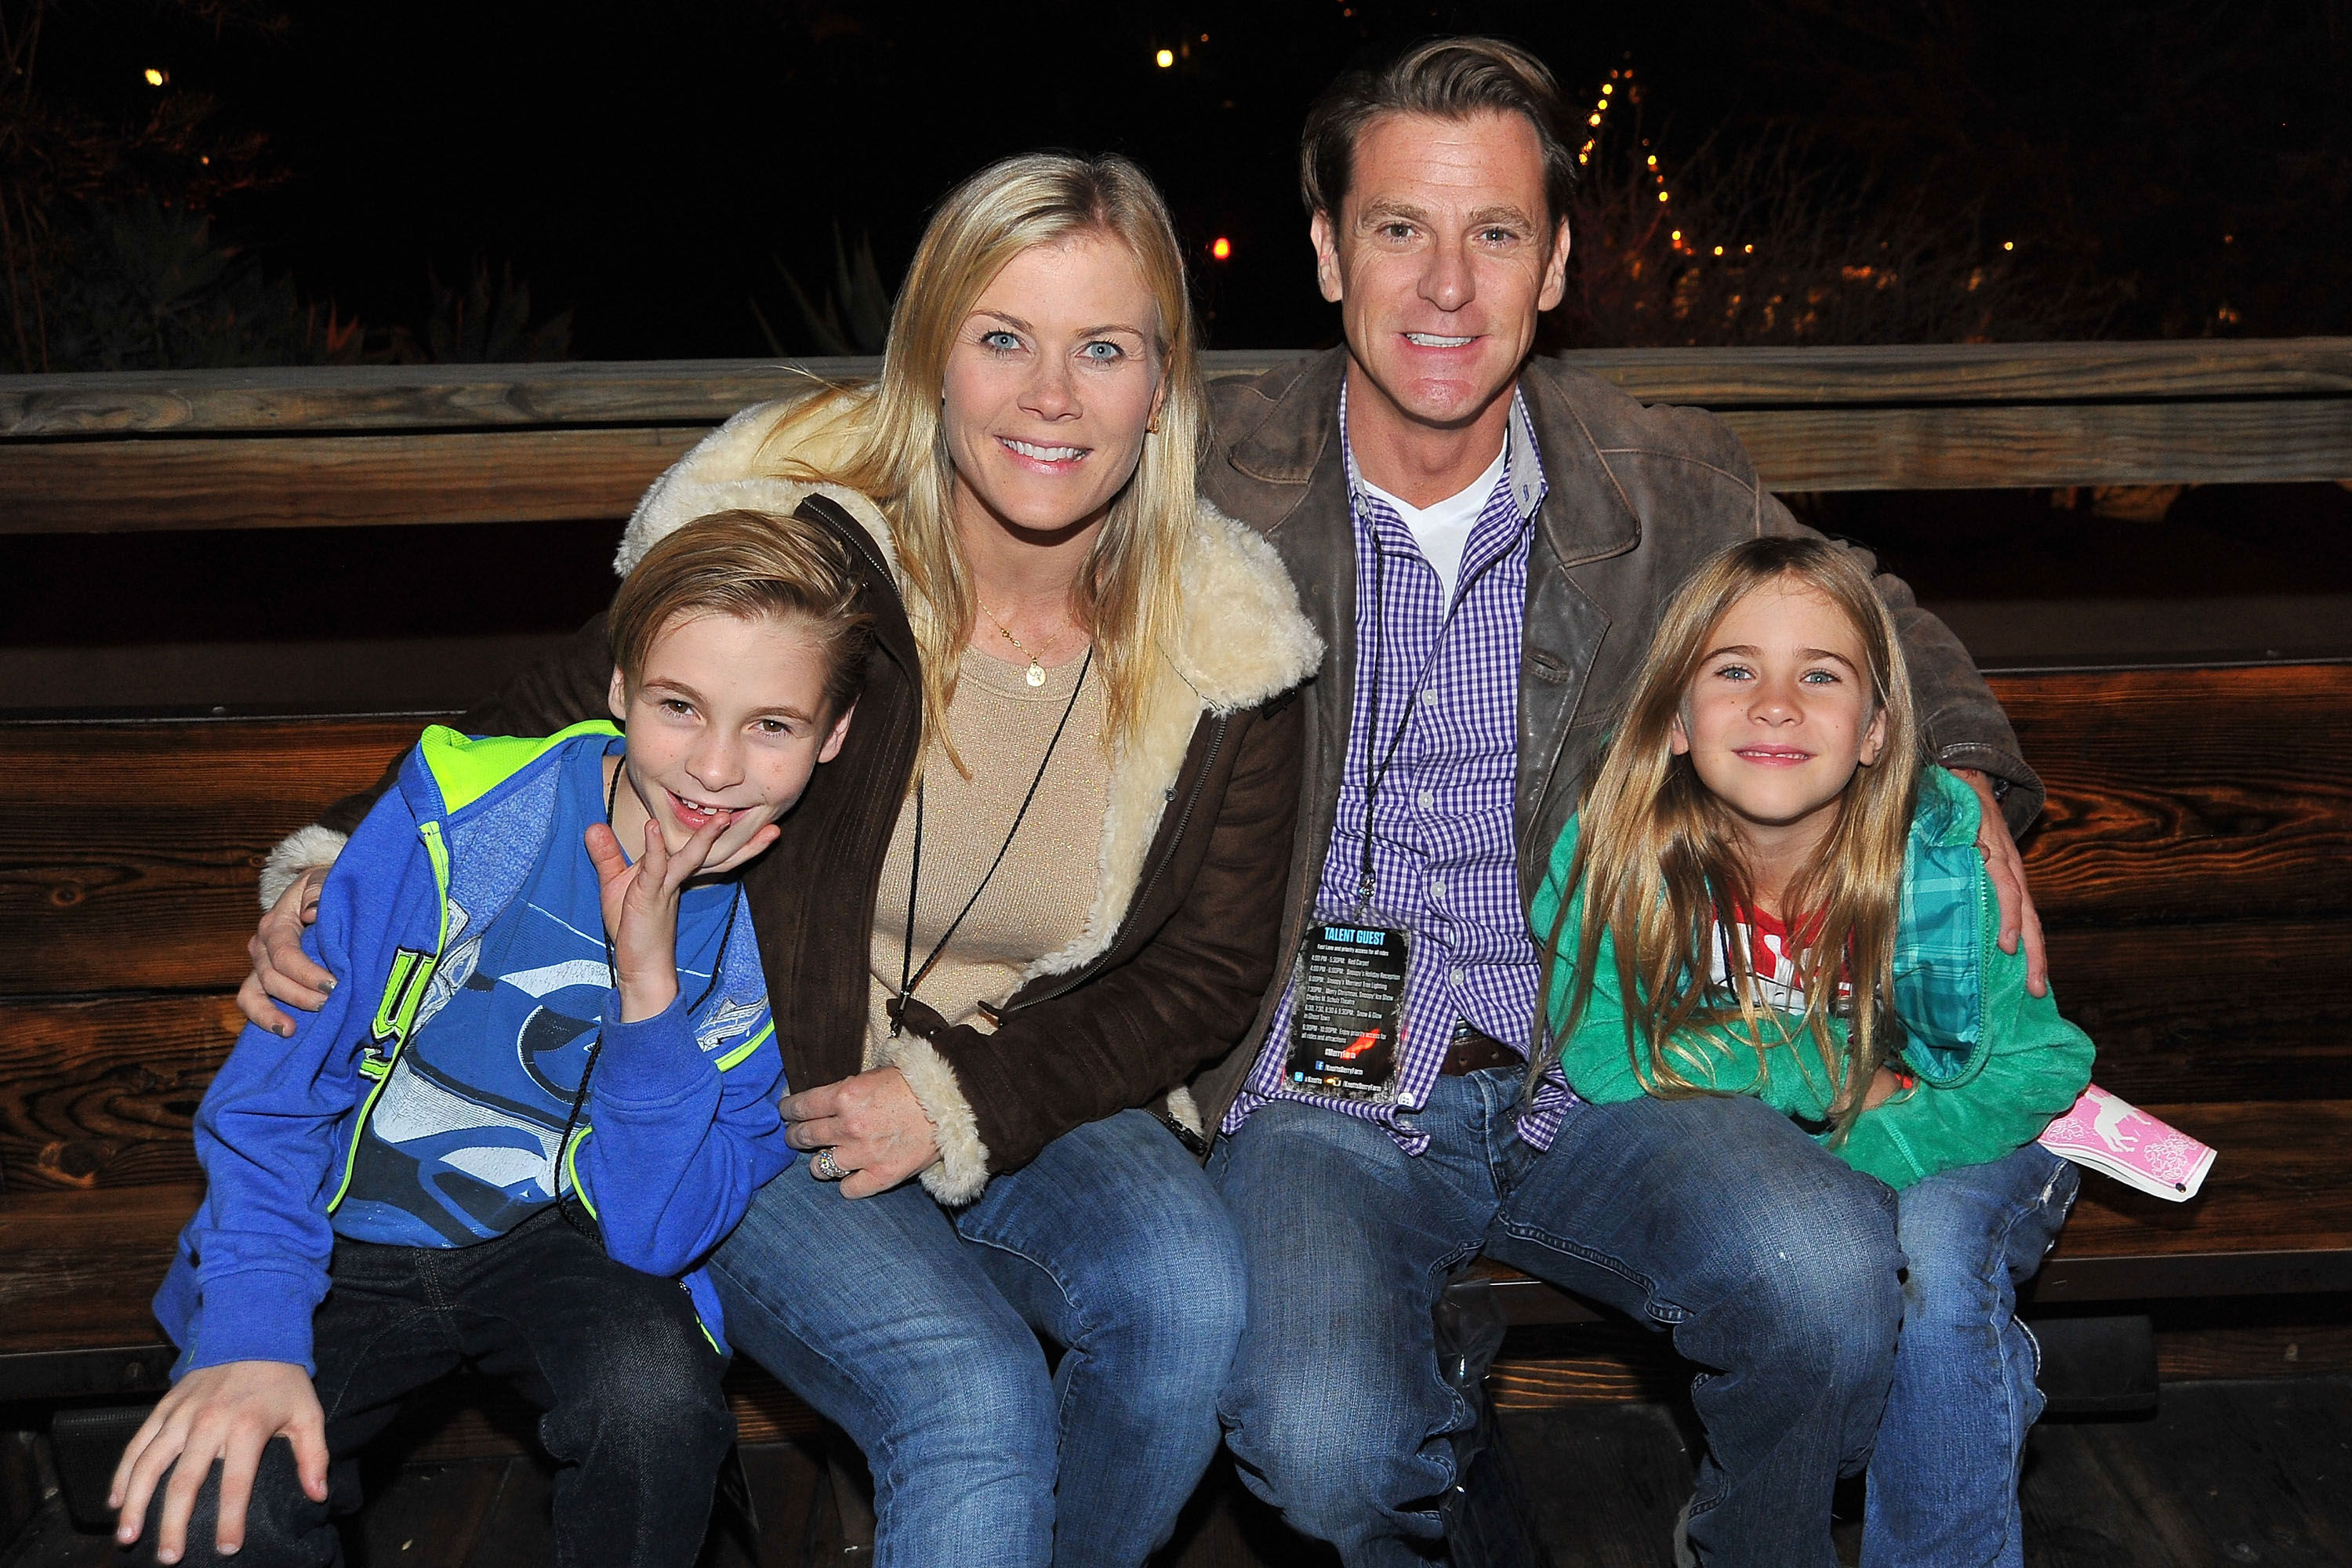 Alison Sweeney and David Sanov with their children Benjamin and Megan at Knott's Berry Farm on December 5, 2015, in Buena Park, California | Source: Getty Images